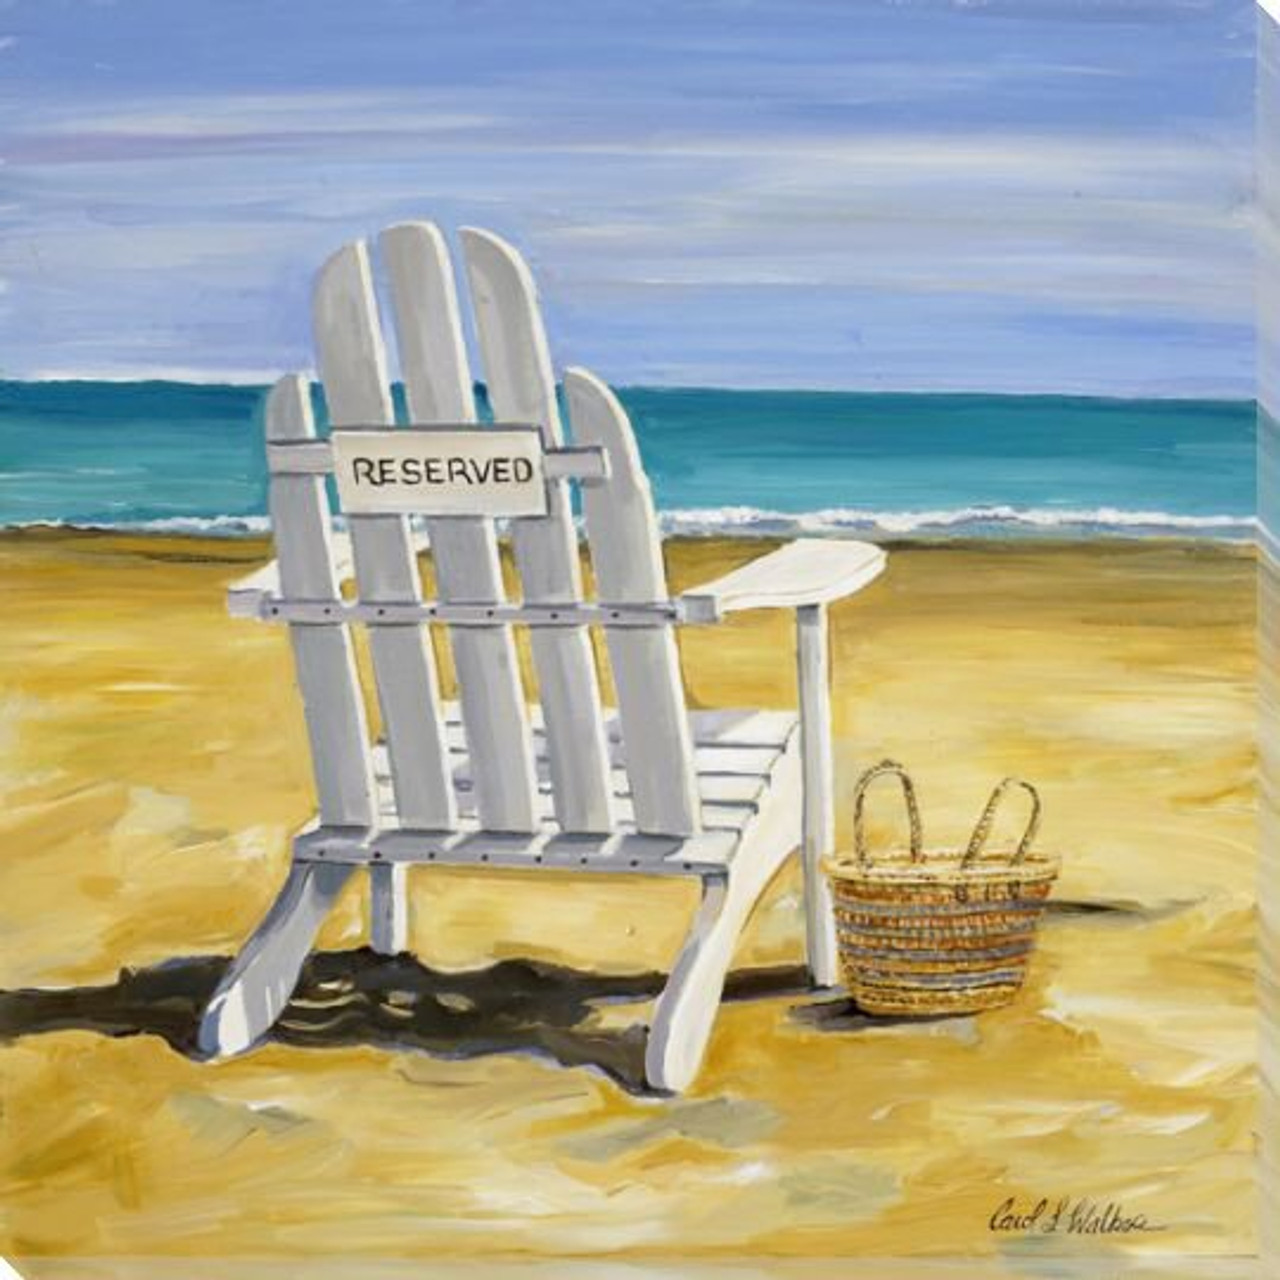 https://cdn11.bigcommerce.com/s-oo0gdojvjo/images/stencil/1280x1280/products/11178/21045/reserved-beach-chair-wrapped-canvas-giclee-art-print-wall-art__11274.1537086911.jpg?c=2